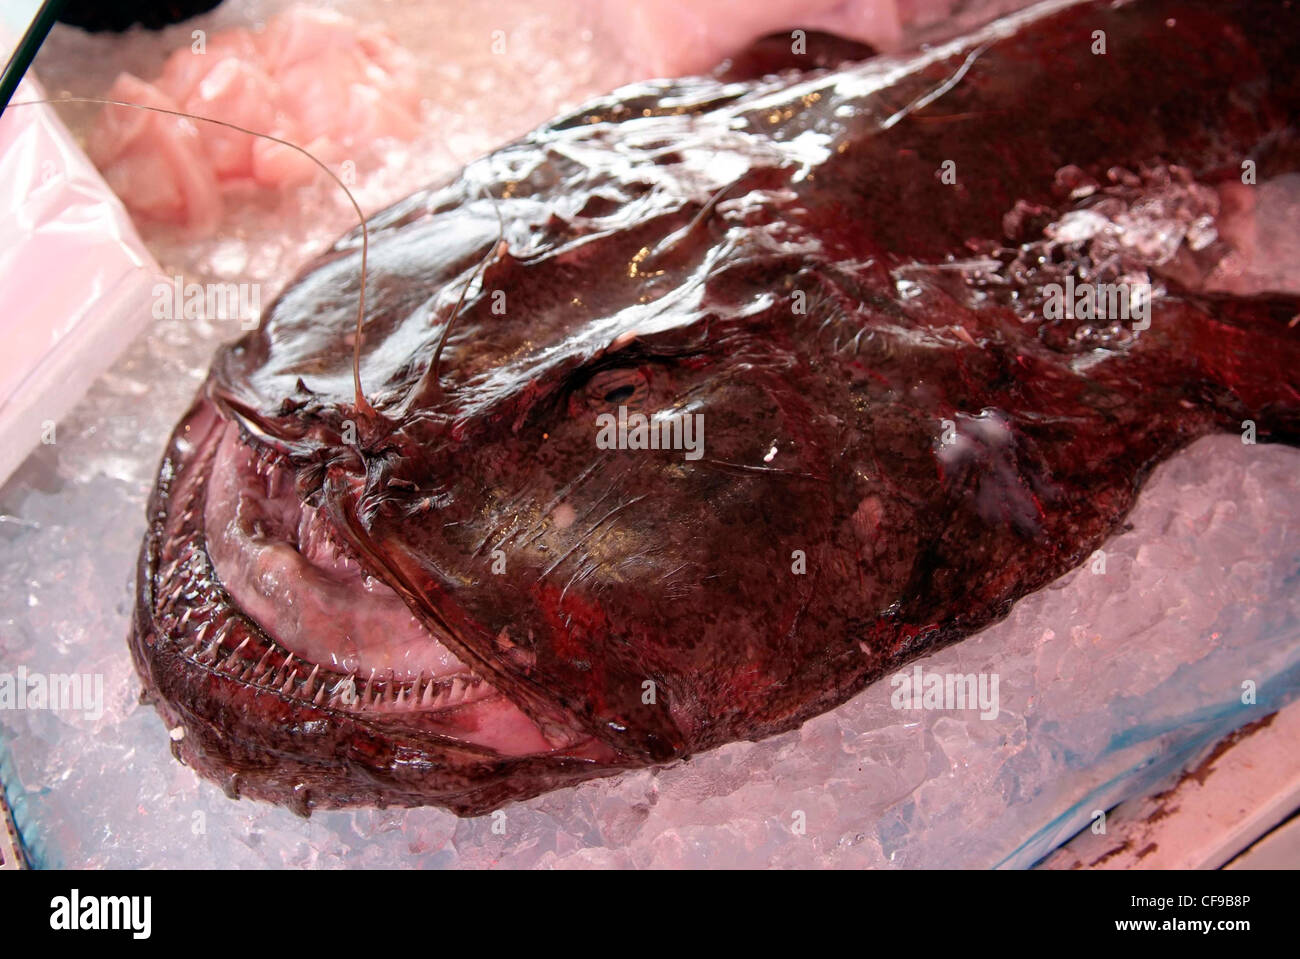 NORWAY Bergen Fish Market angler fish on ice on a fishmongers stall. Stock Photo